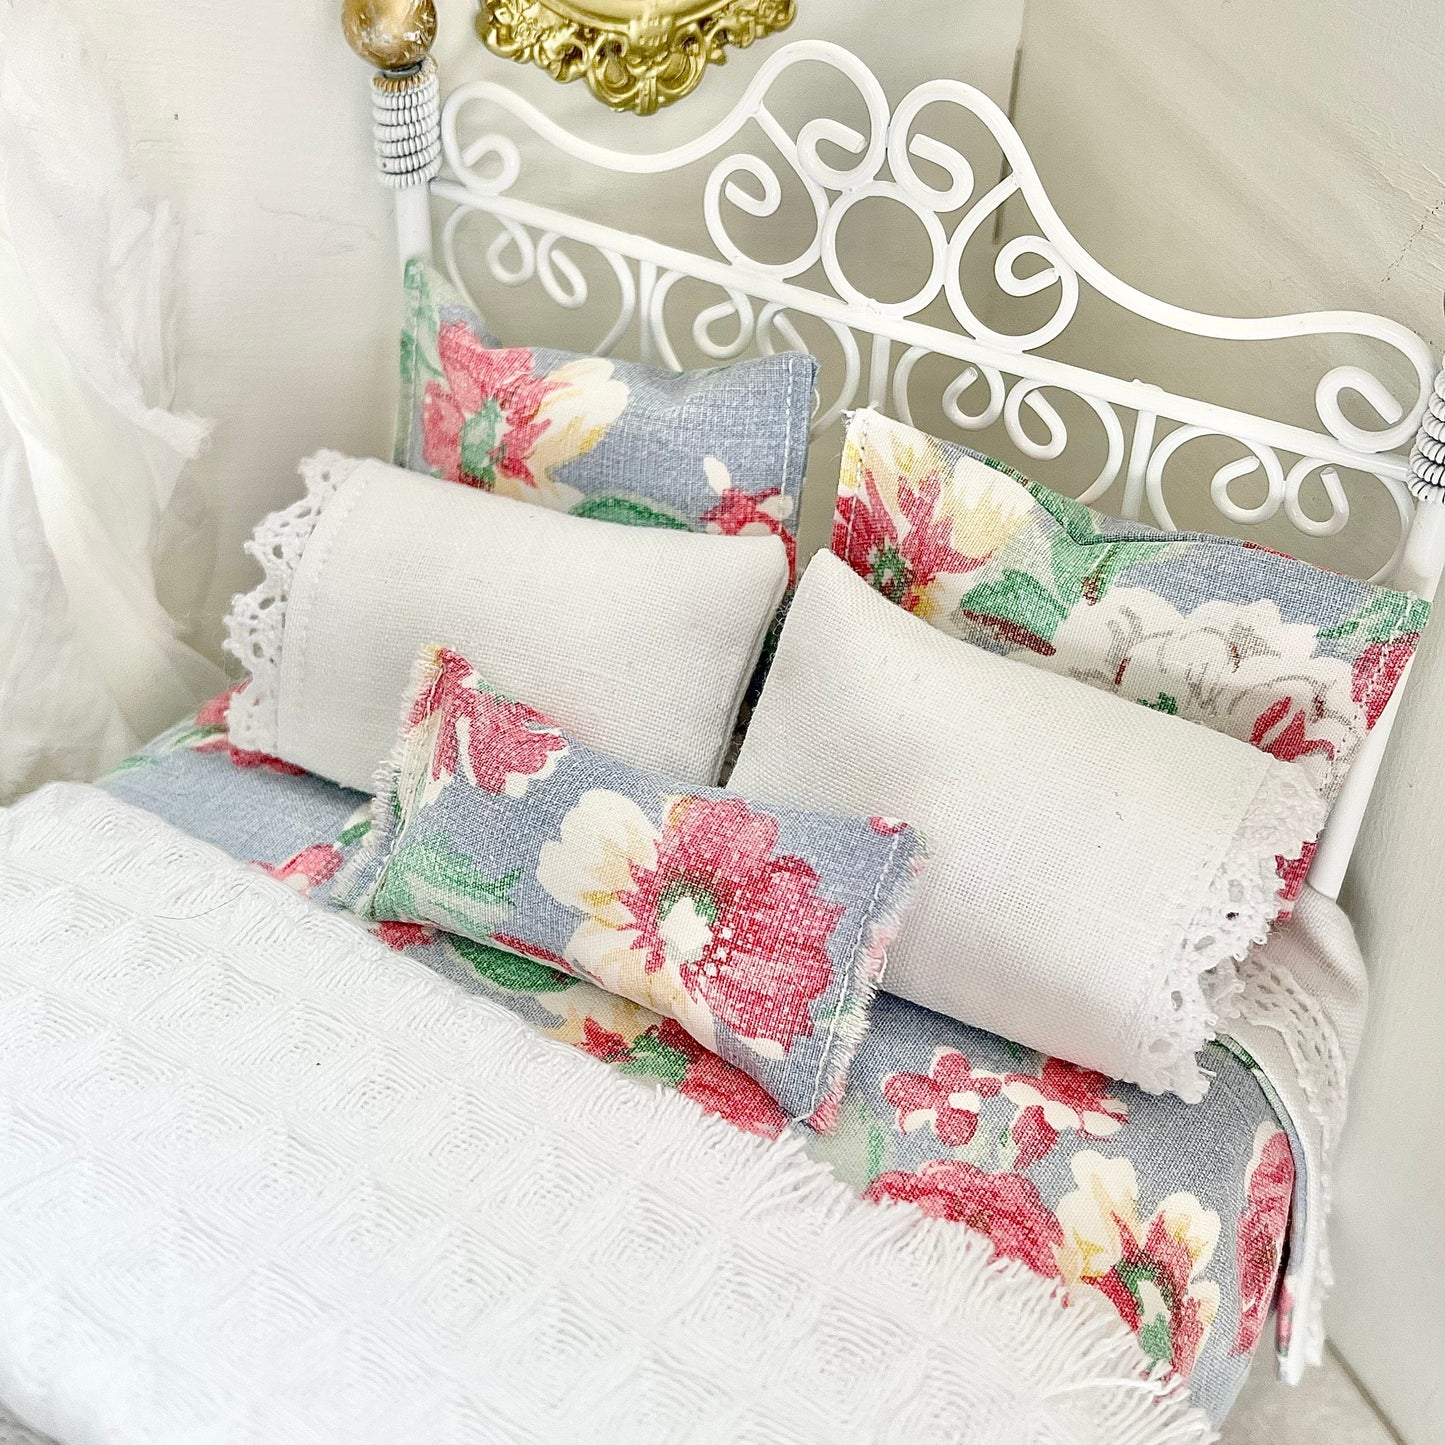 Chantallena Doll House Prairie Country - Blue Floral Cotton Bedding Set with White Lace Trim 1:12 Scale